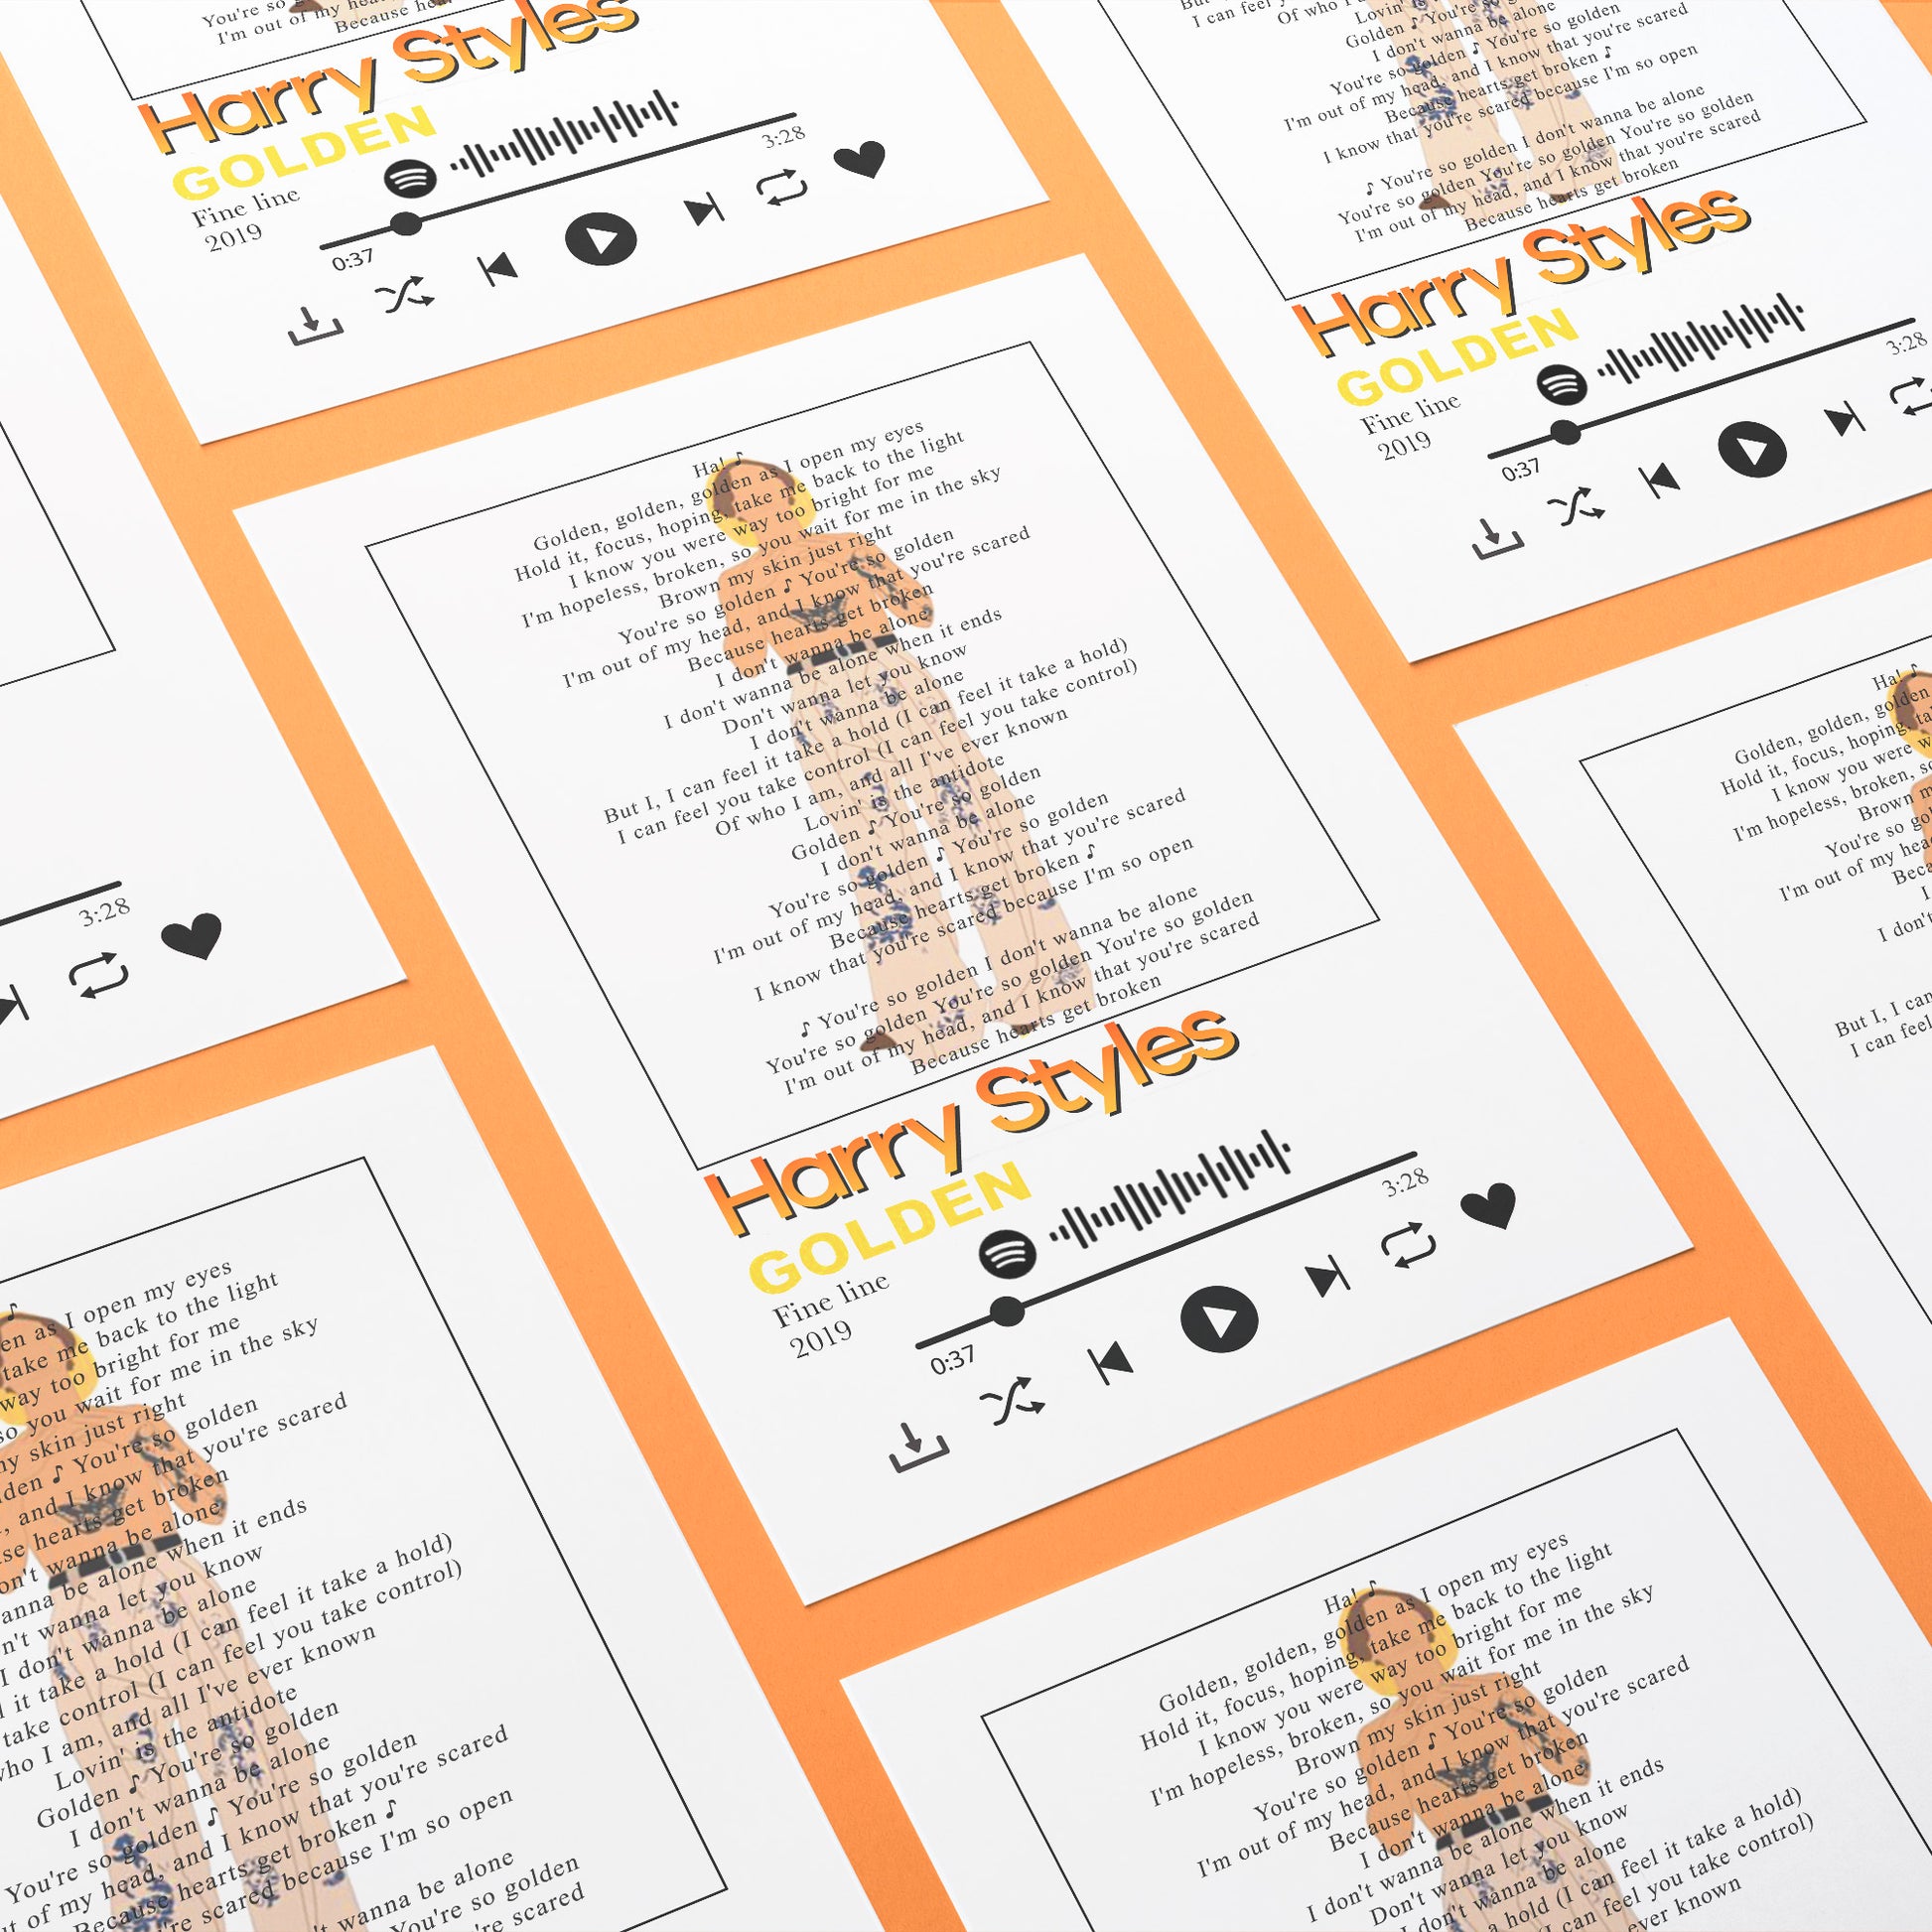 Make your walls sing with Harry Styles's "Golden Prints"! Show off your fandom with a custom lyric print of your favorite Spotify-streamed song—the perfect one-of-a-kind gift for any music lover! Plus, you get to choose the text and design, so your print will be as unique as the songs and memories it represents!